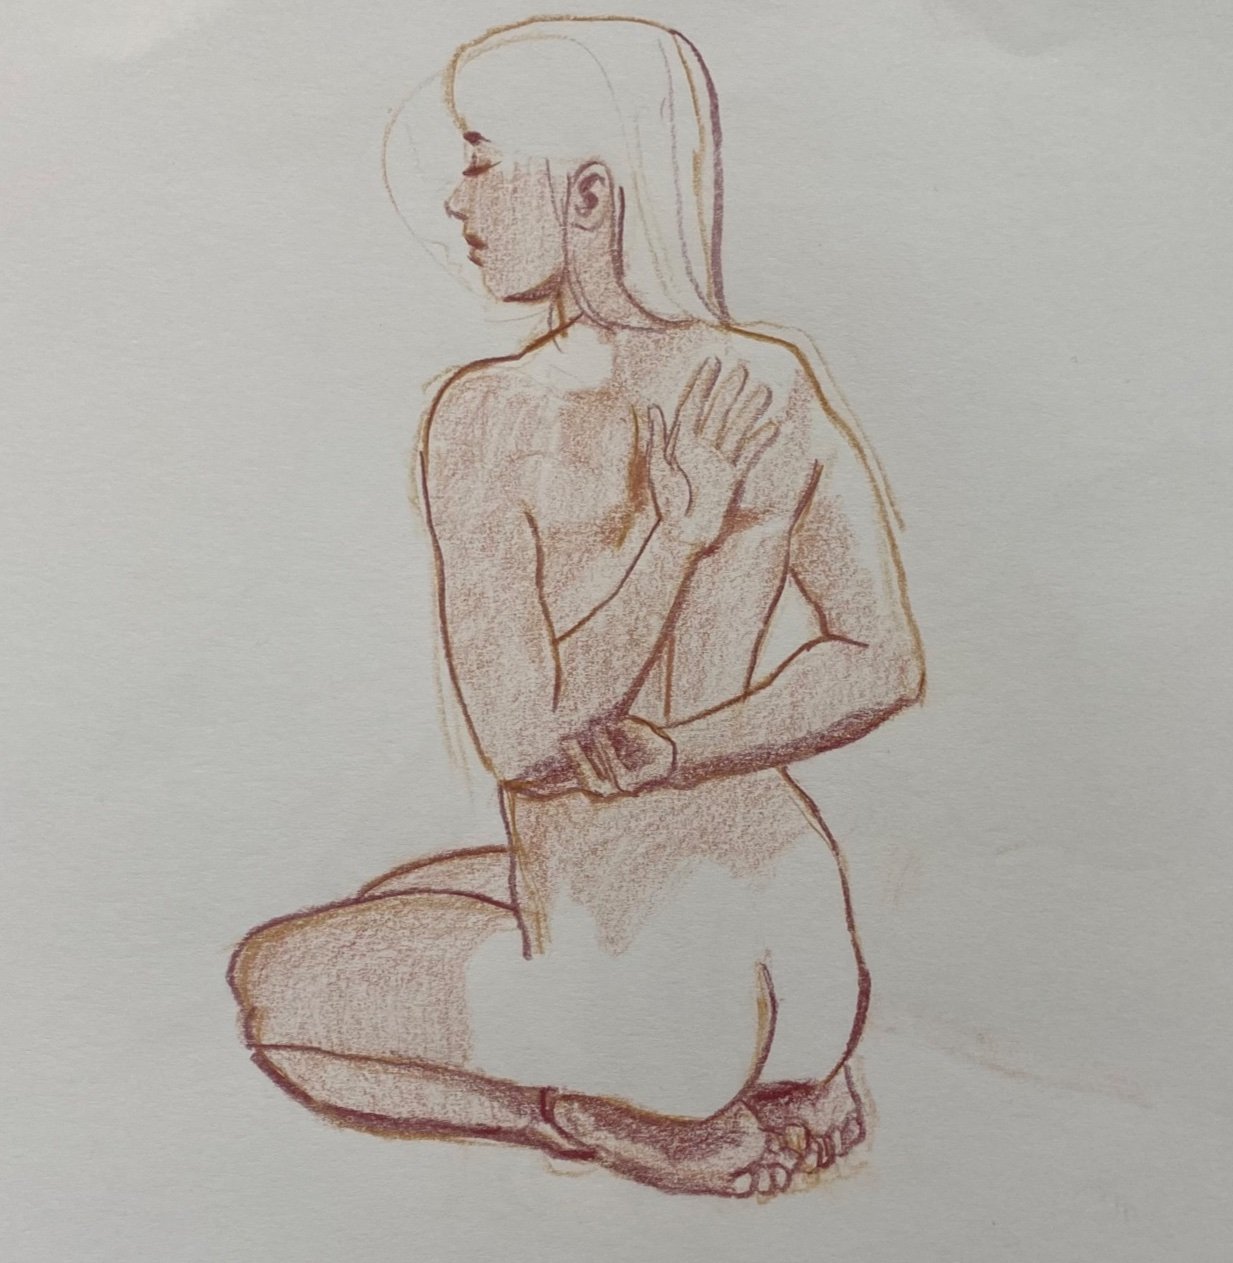 Life Drawing Tuesdays In Cardiff